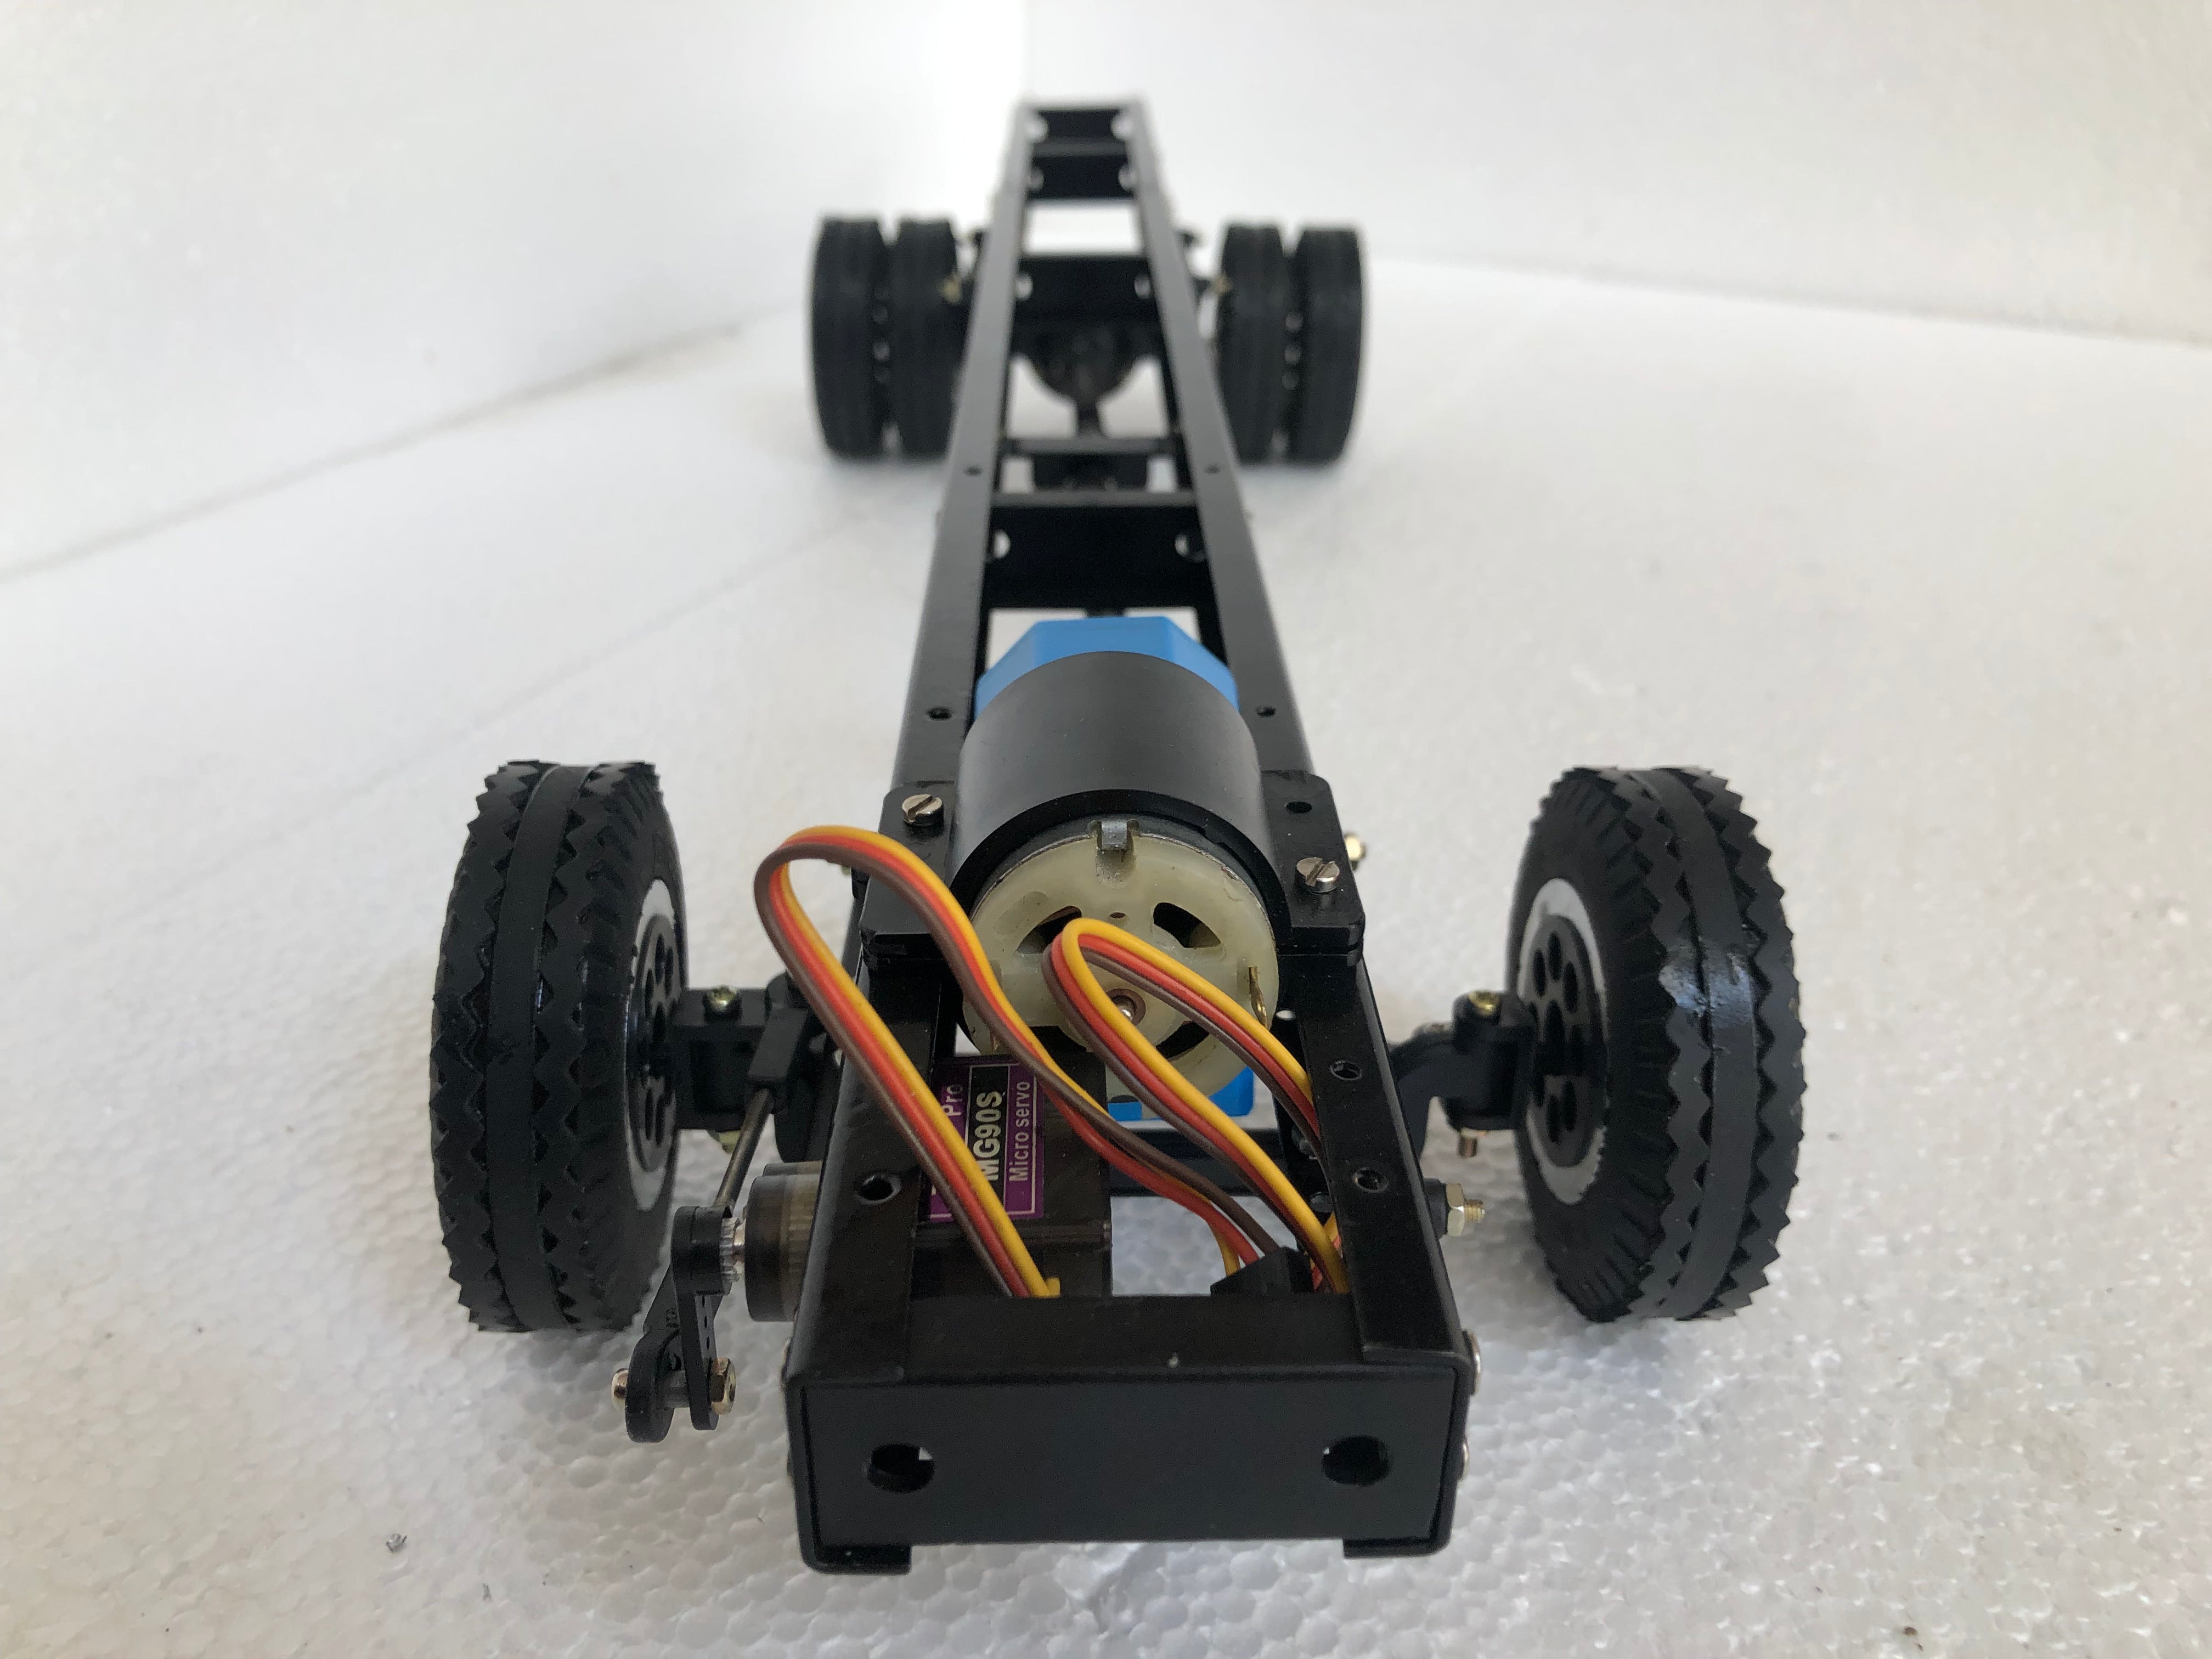 6 Wheel Chassis with Motor-Gearbox and Steering Servo (Scale 1:18)